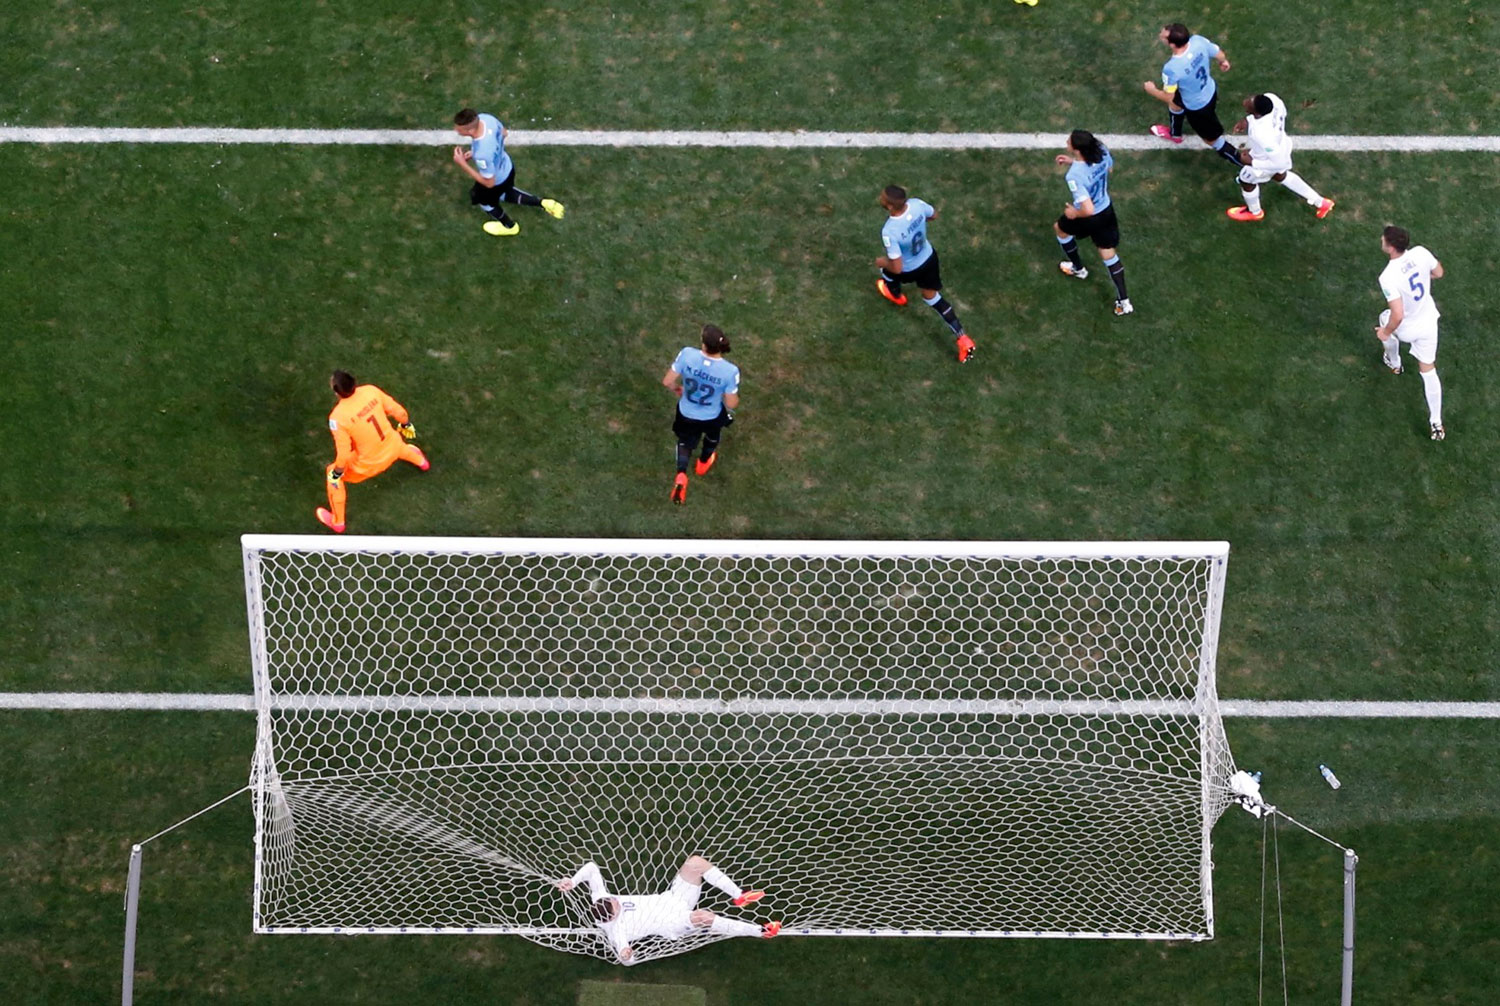 England's Wayne Rooney tangles himself in the net after failing to score a goal against Uruguay during their match at the Corinthians arena in Sao Paulo on June 19, 2014.